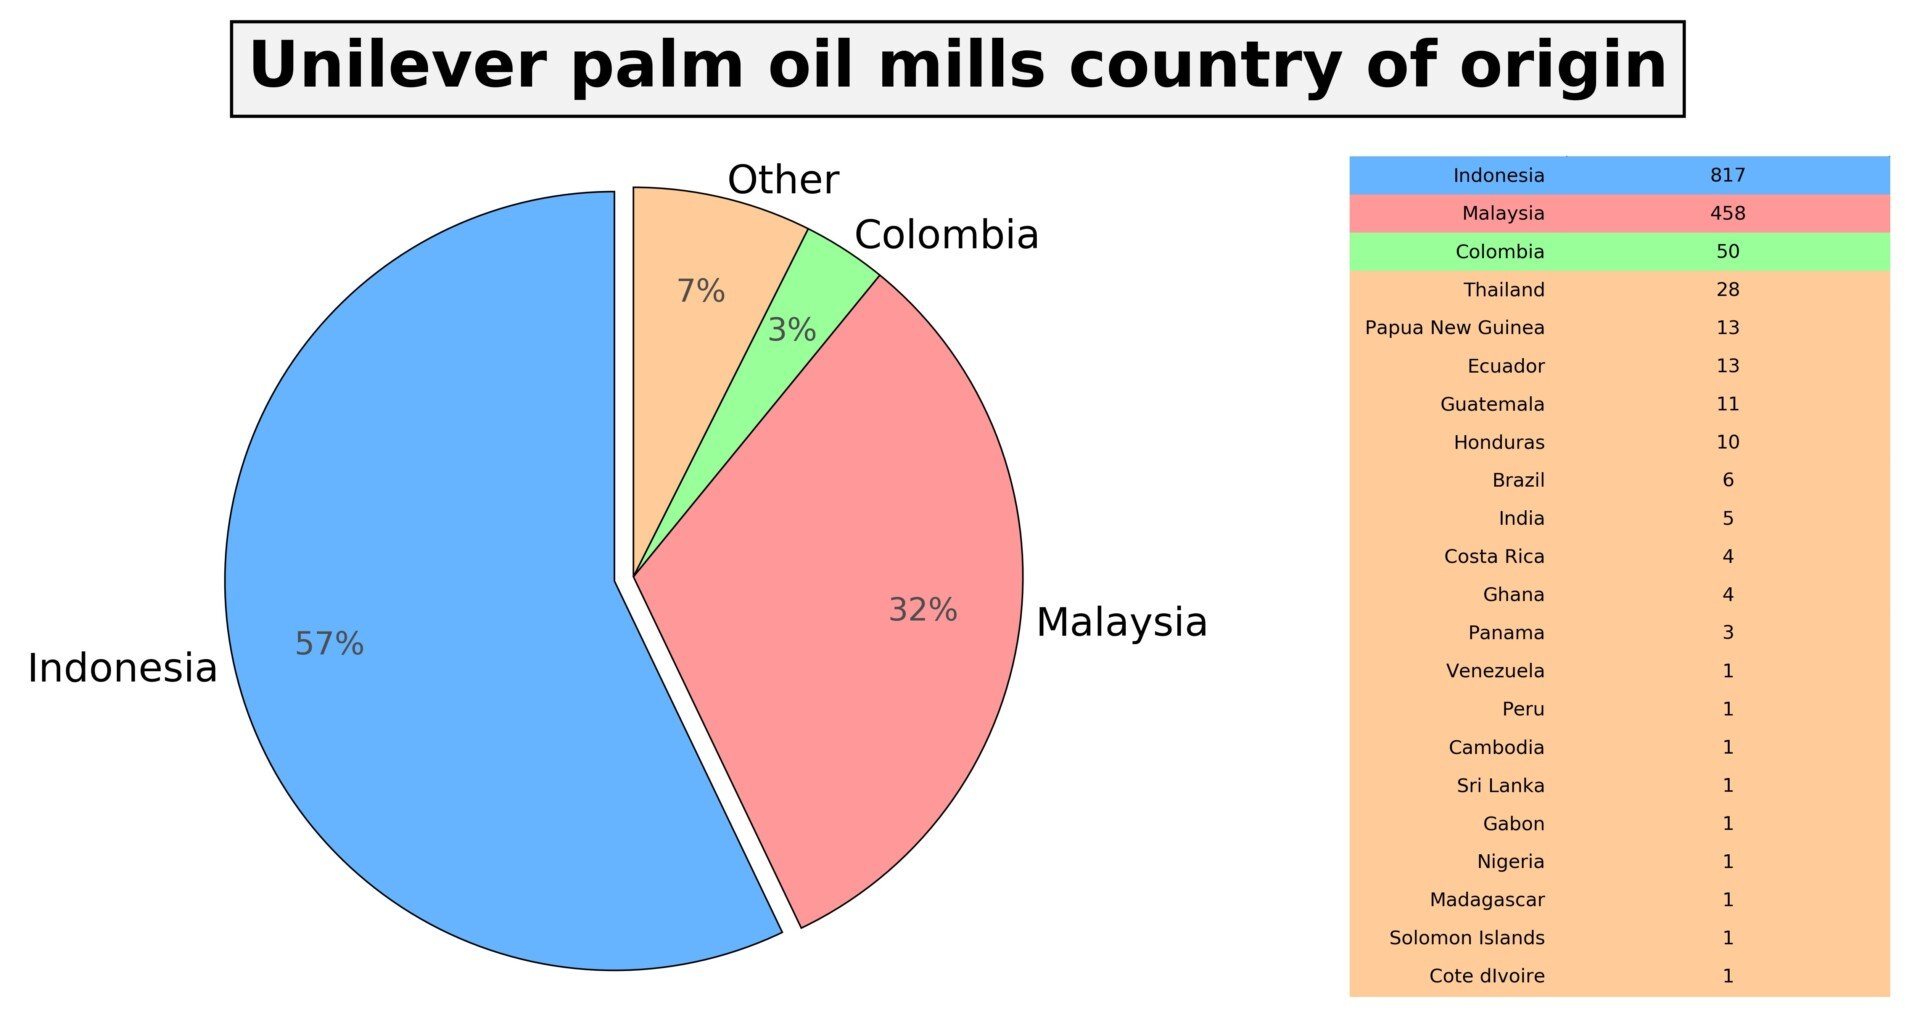 Unilever palm oil mills country pie chart